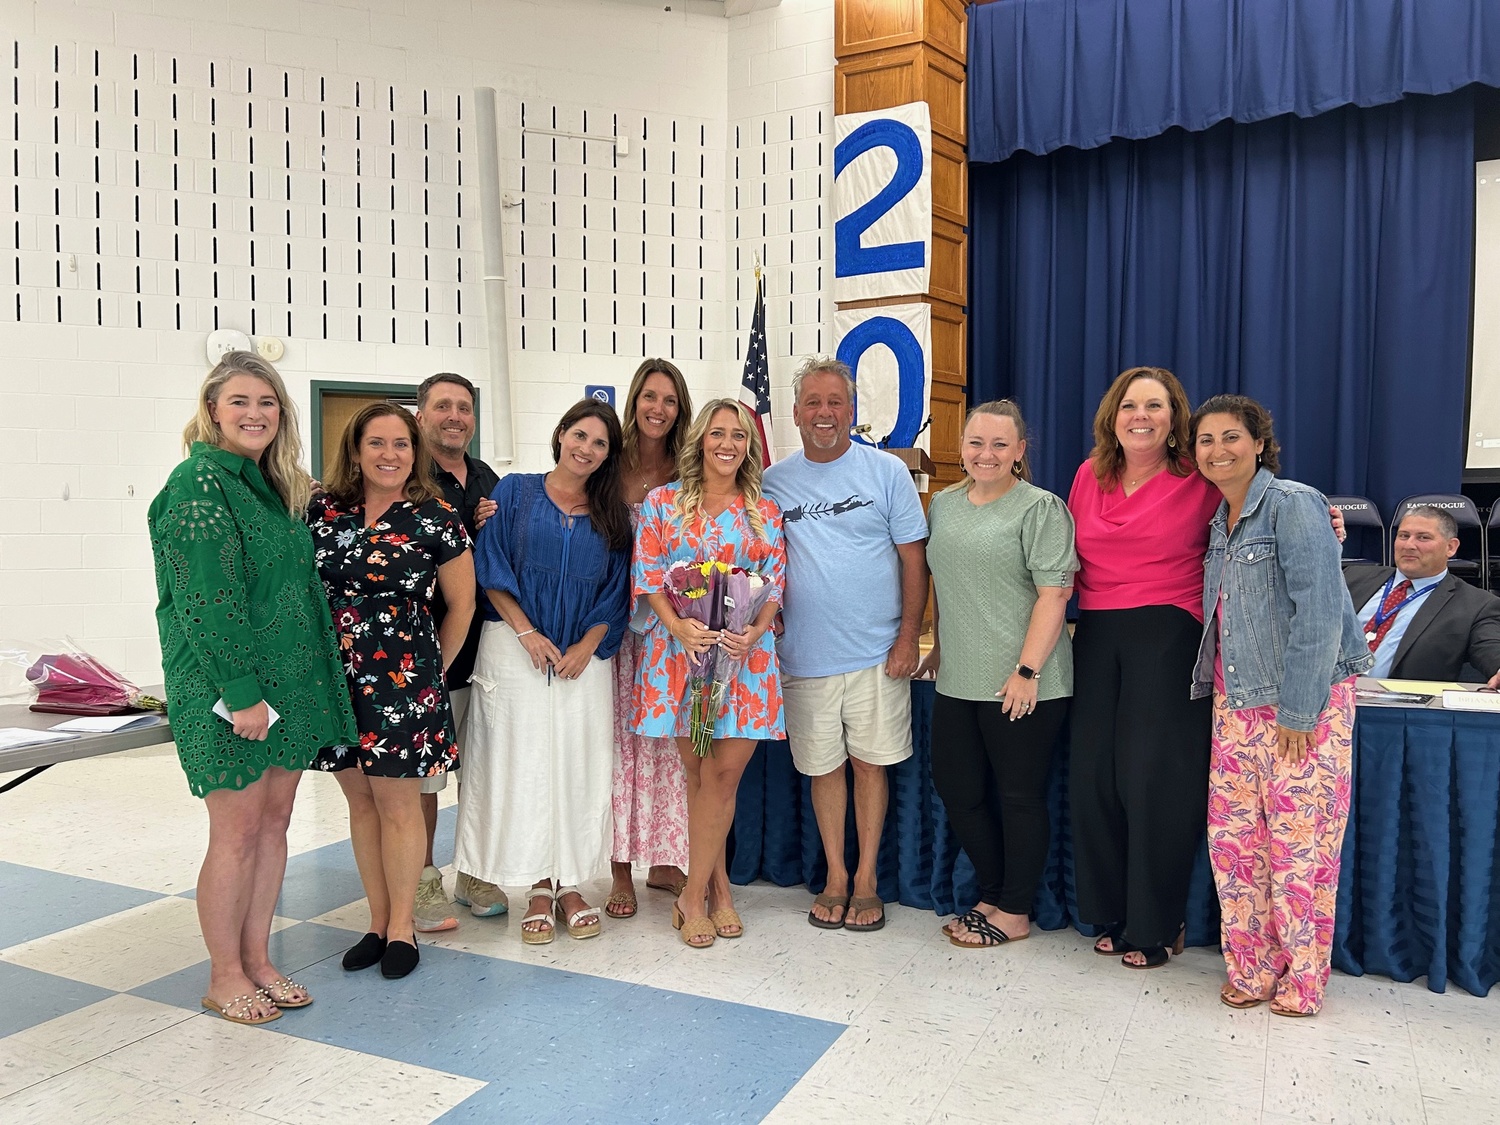 East Quogue School kindergarten teacher Paige Bonner, center, was granted tenure during the June 17  Board of Education meeting. She is surrounded by family and members of the board. COURTESY EAST QUOGUE SCHOOL DISTRICT